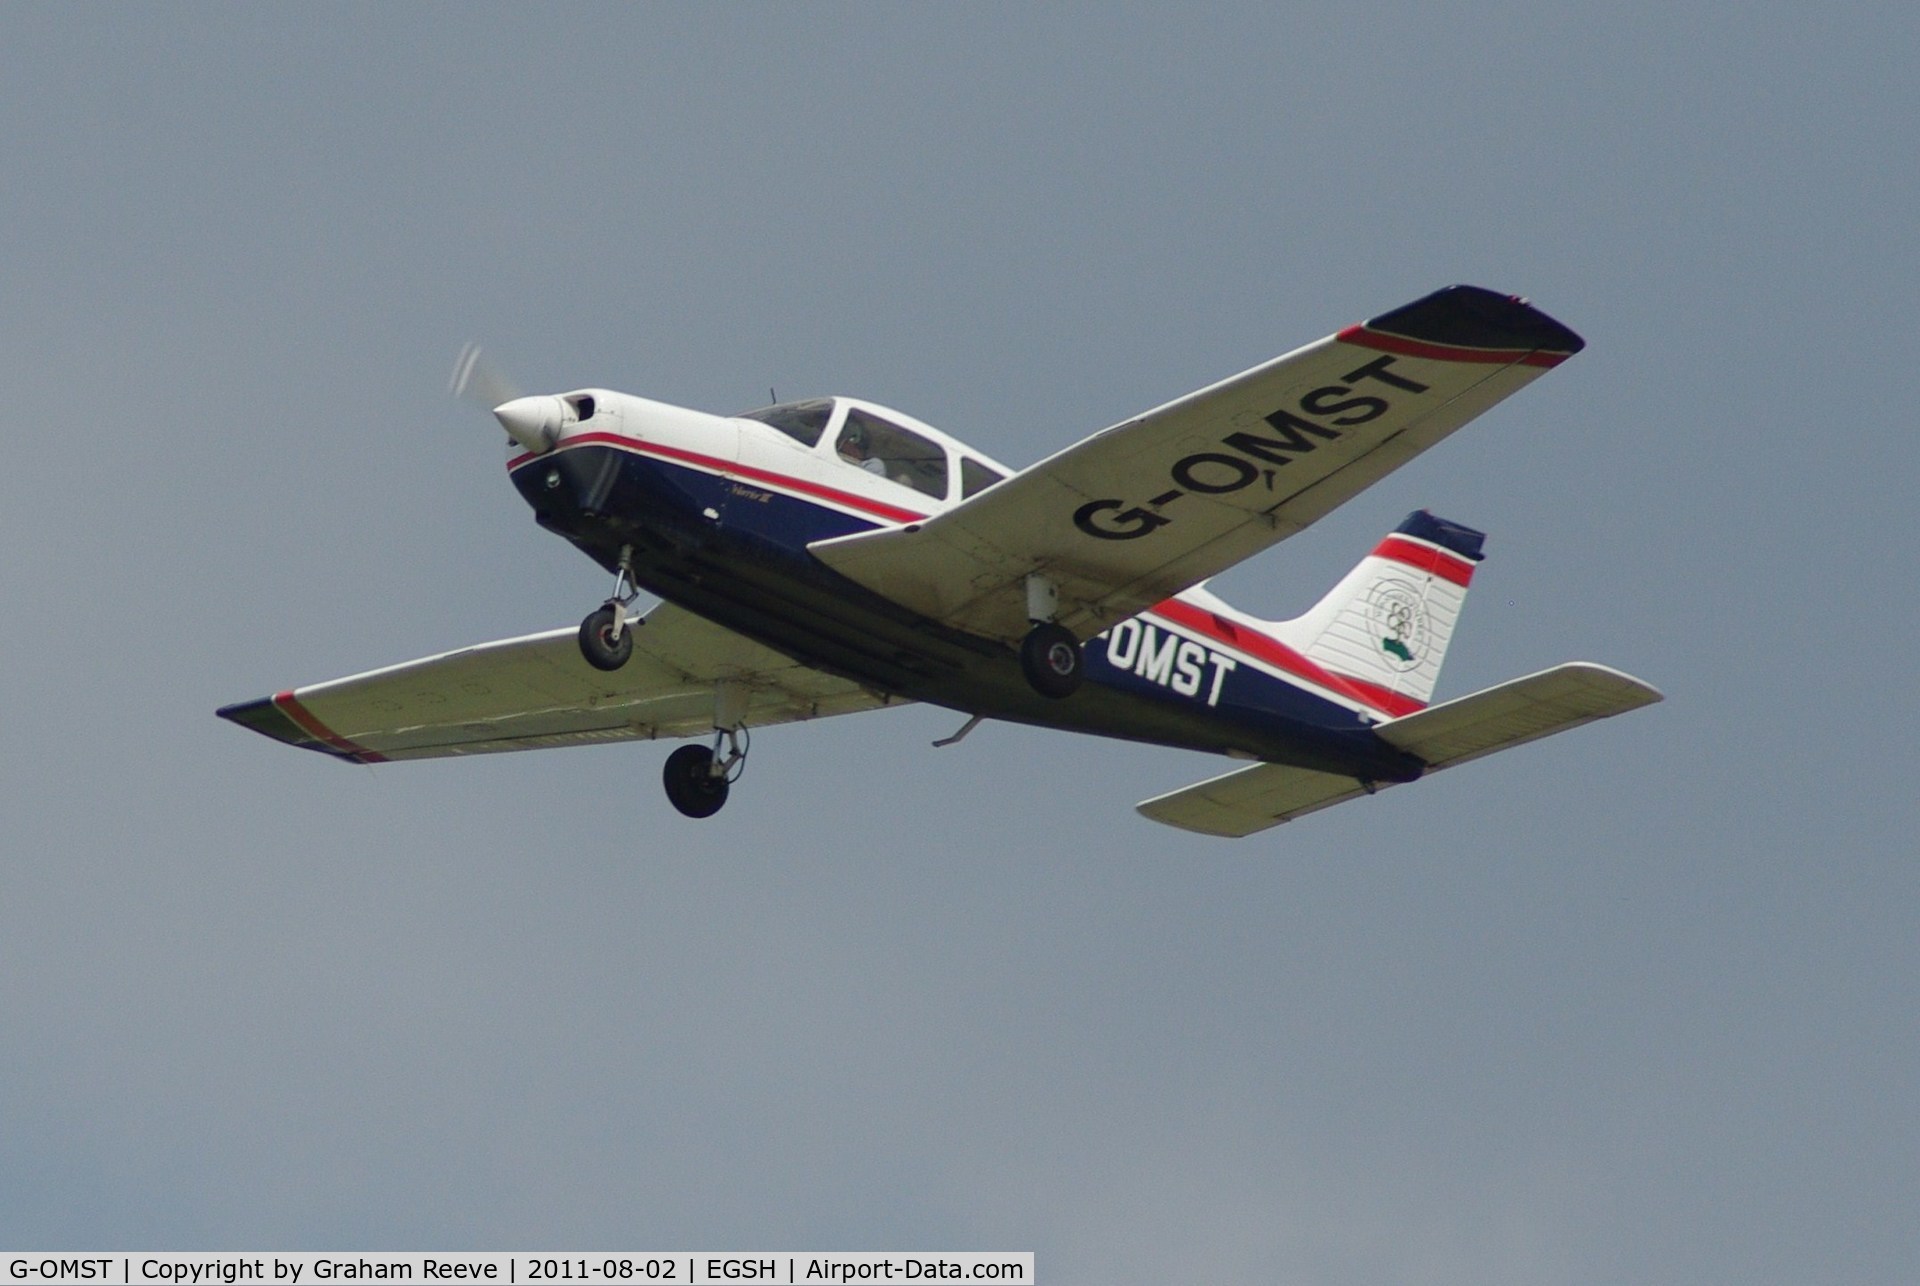 G-OMST, 2001 Piper PA-28-161 Cherokee Warrior III C/N 2842121, Departing from Norwich.